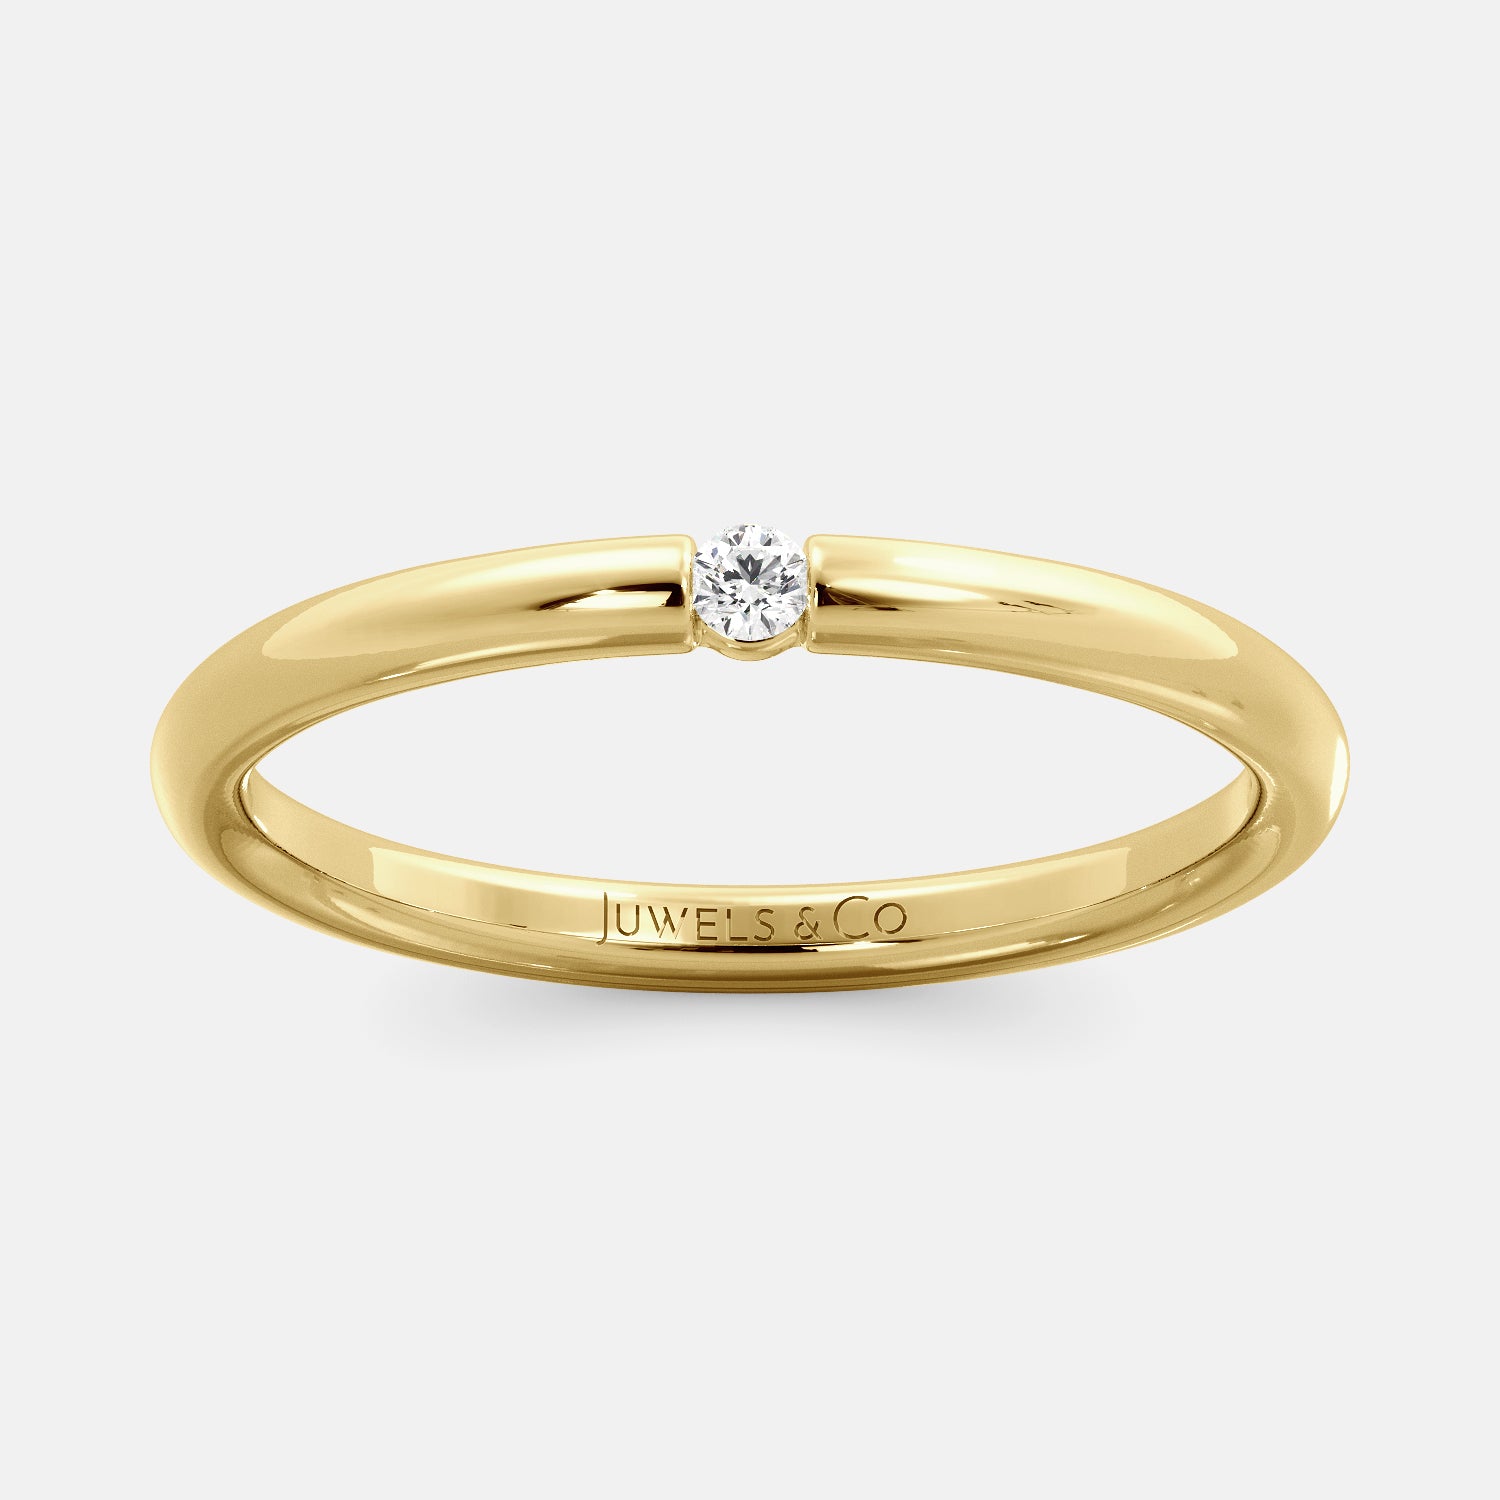 A close-up of a simple round wedding band in 14K yellow gold with a small round diamond in the center. The band is a classic and timeless design that is perfect for any occasion. The diamond is a beautiful accent that adds a touch of glamour.